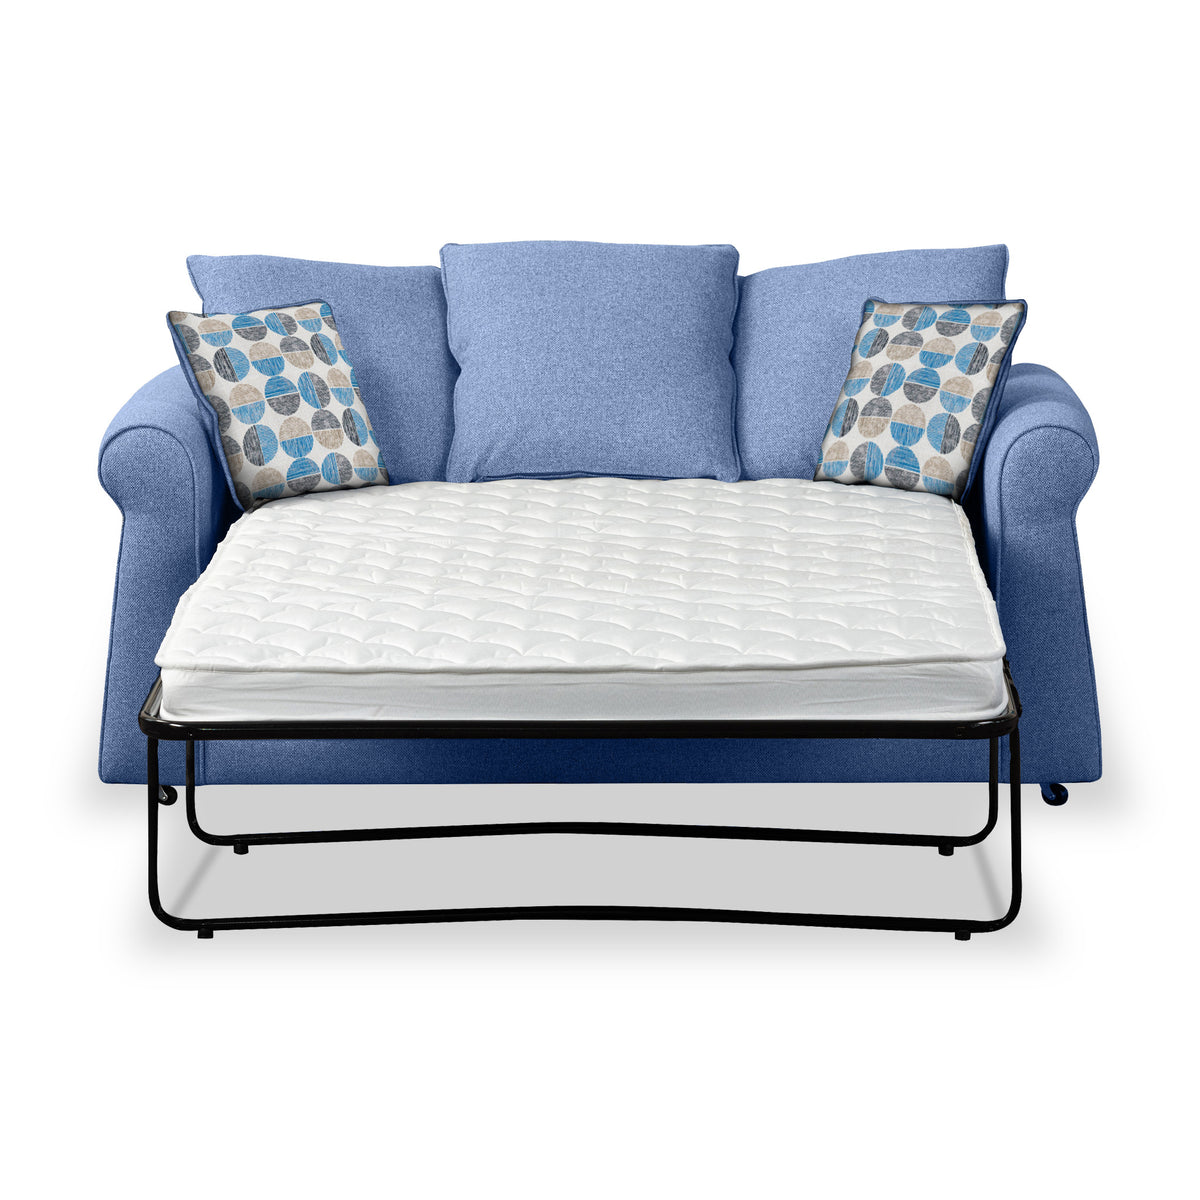 Broughton Denim Faux Linen 2 Seater Sofabed with Blue Scatter Cushions from Roseland Furniture